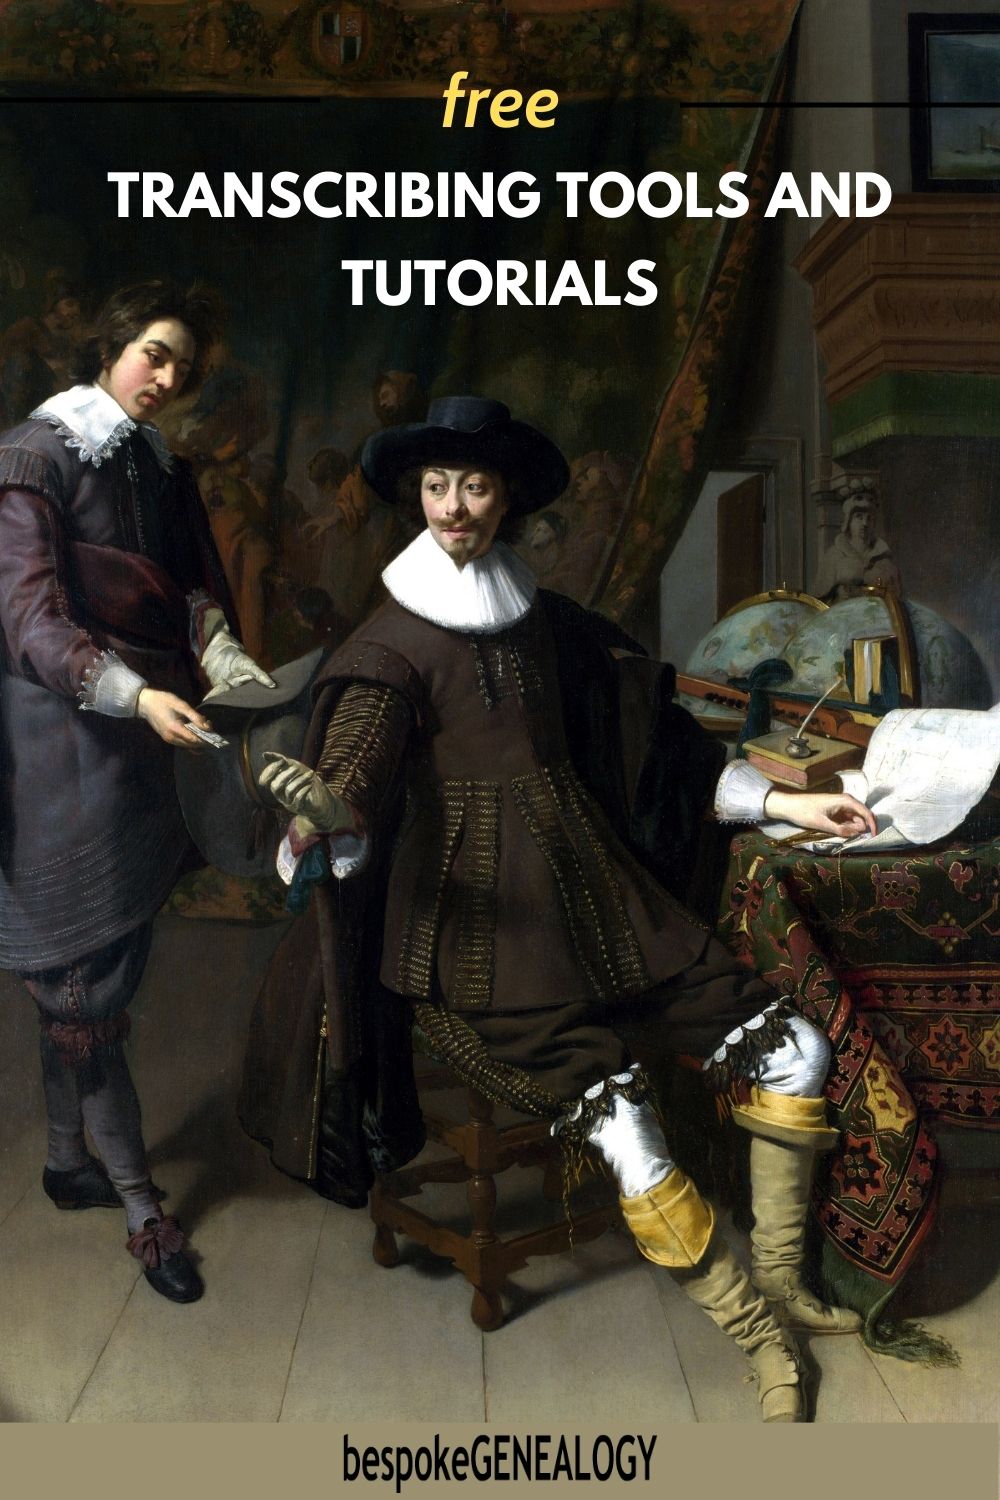 Pinterest pin. Free transcribing tools and tutorials. Part of a Dutch master painting depicting two men, one at a writing desk with some documents.